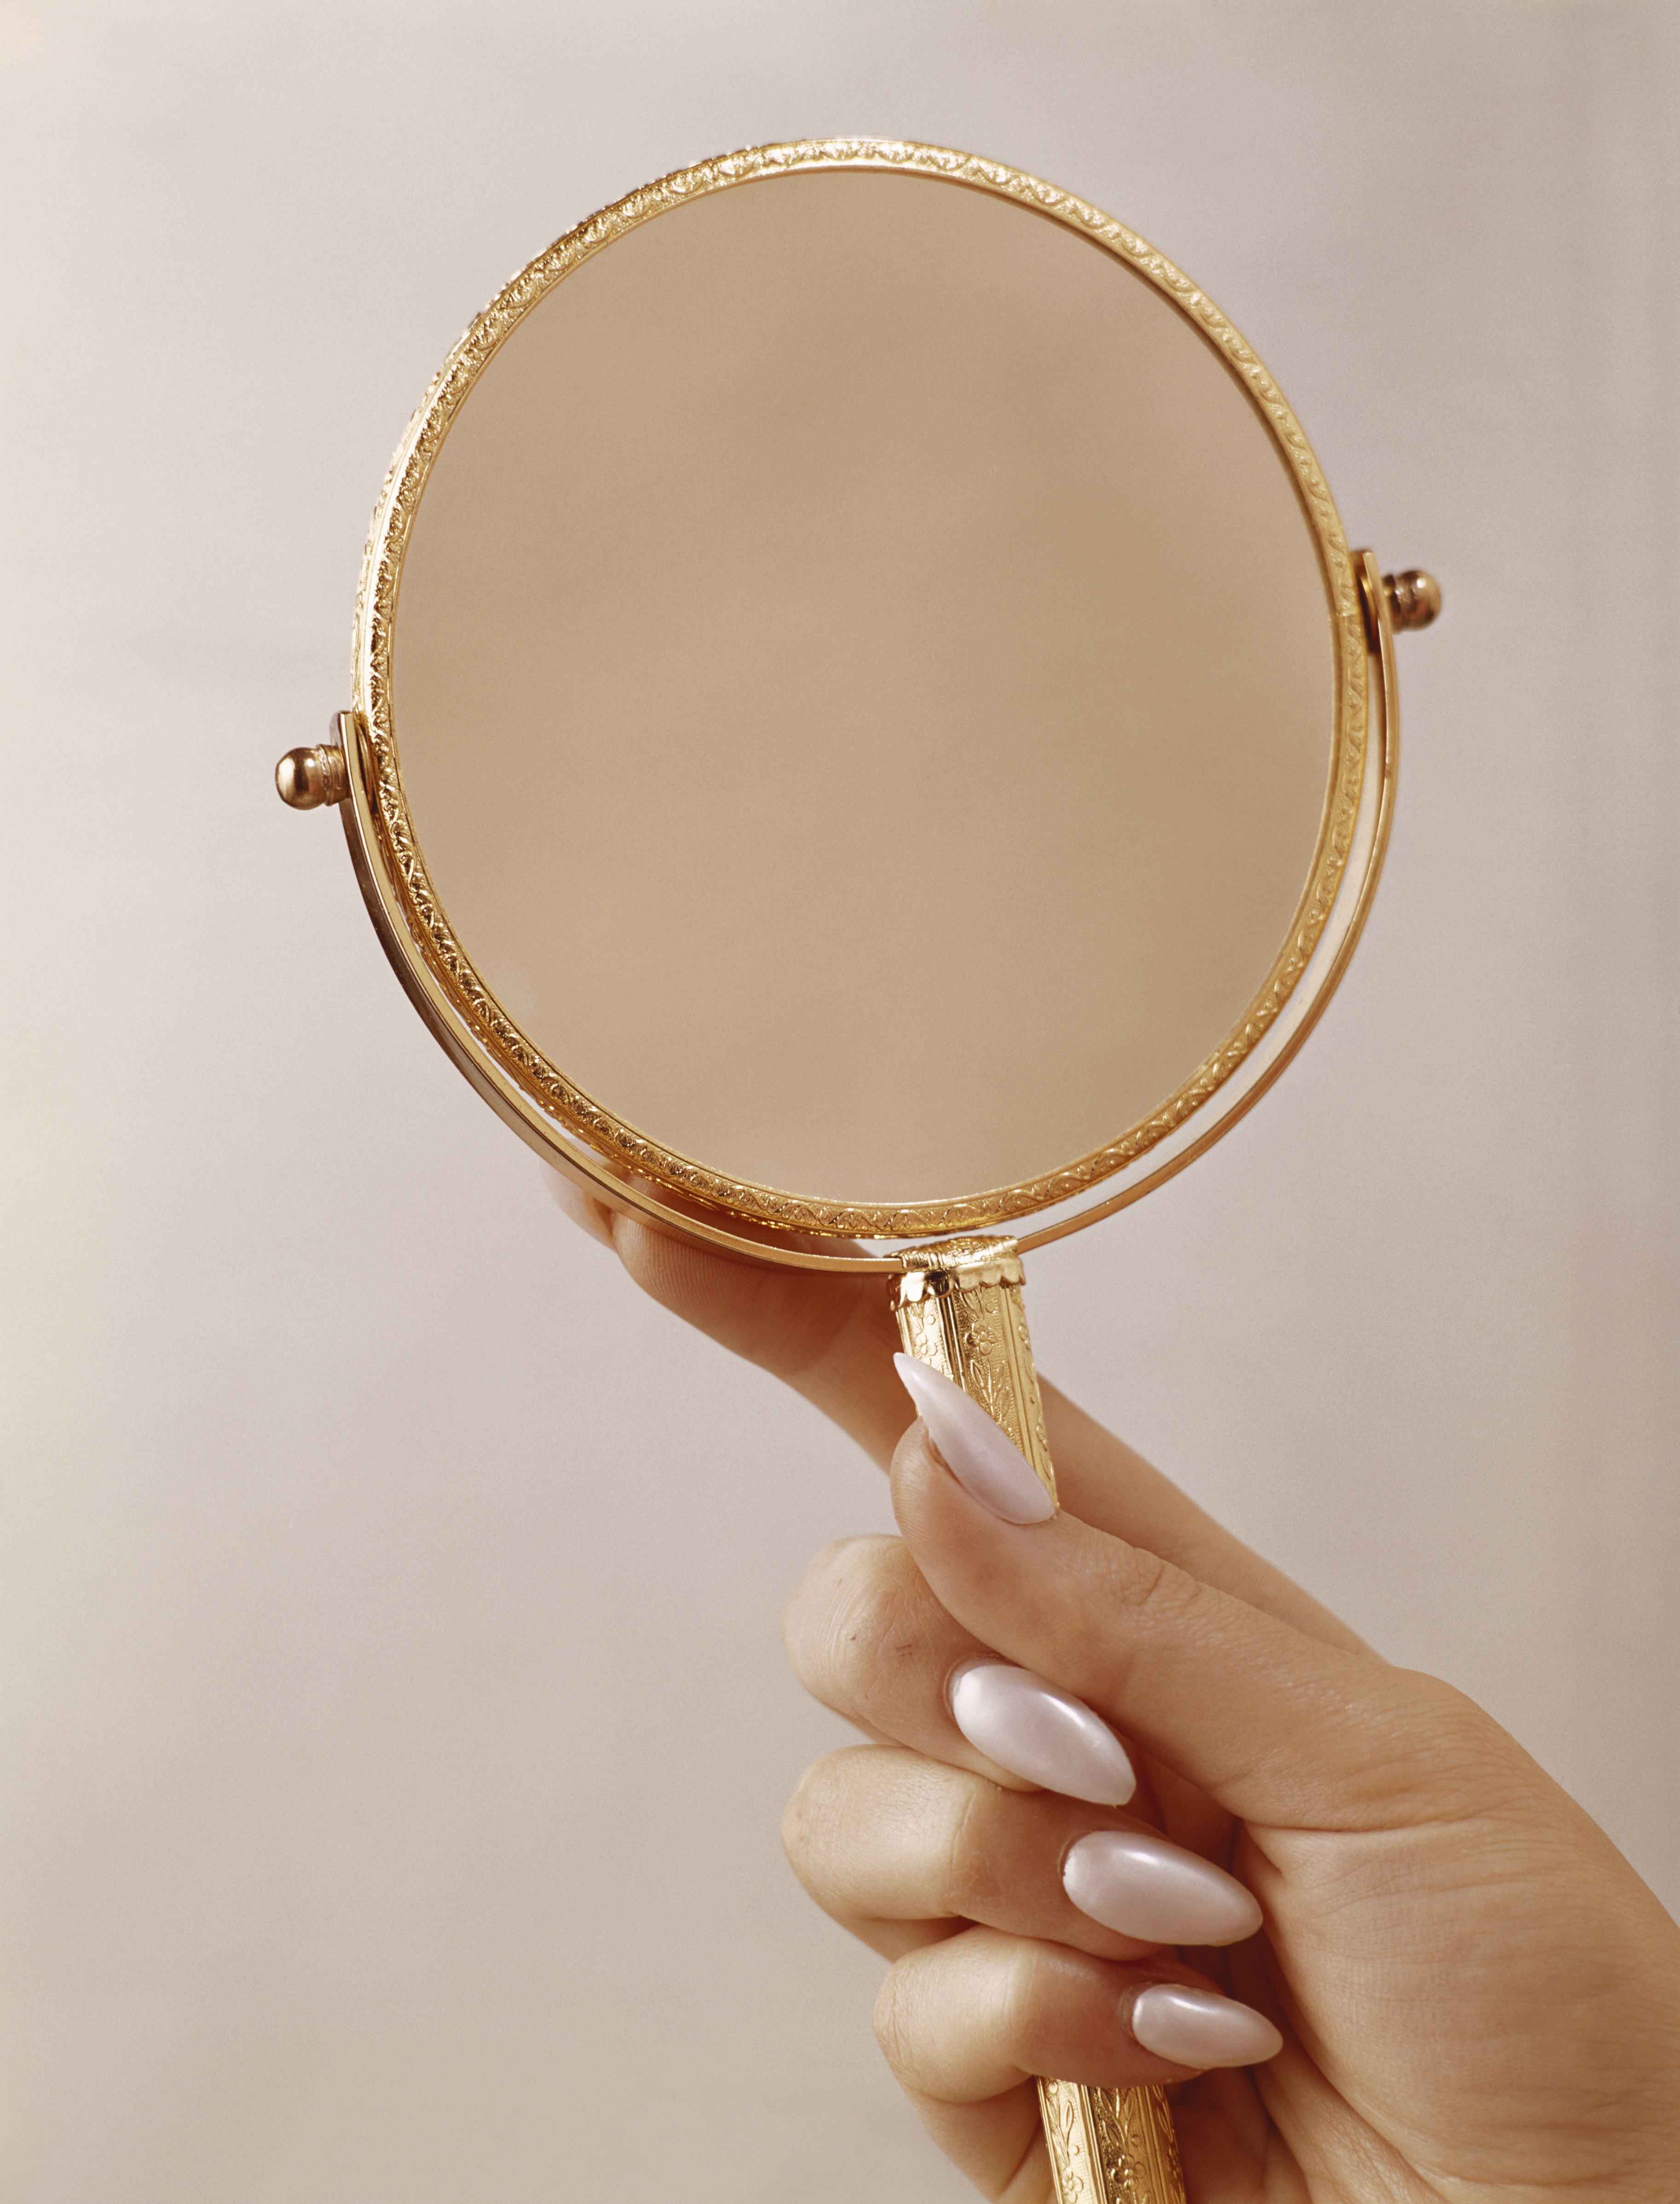 Hand holding an ornate round mirror with delicate detailing on the gold handle and frame